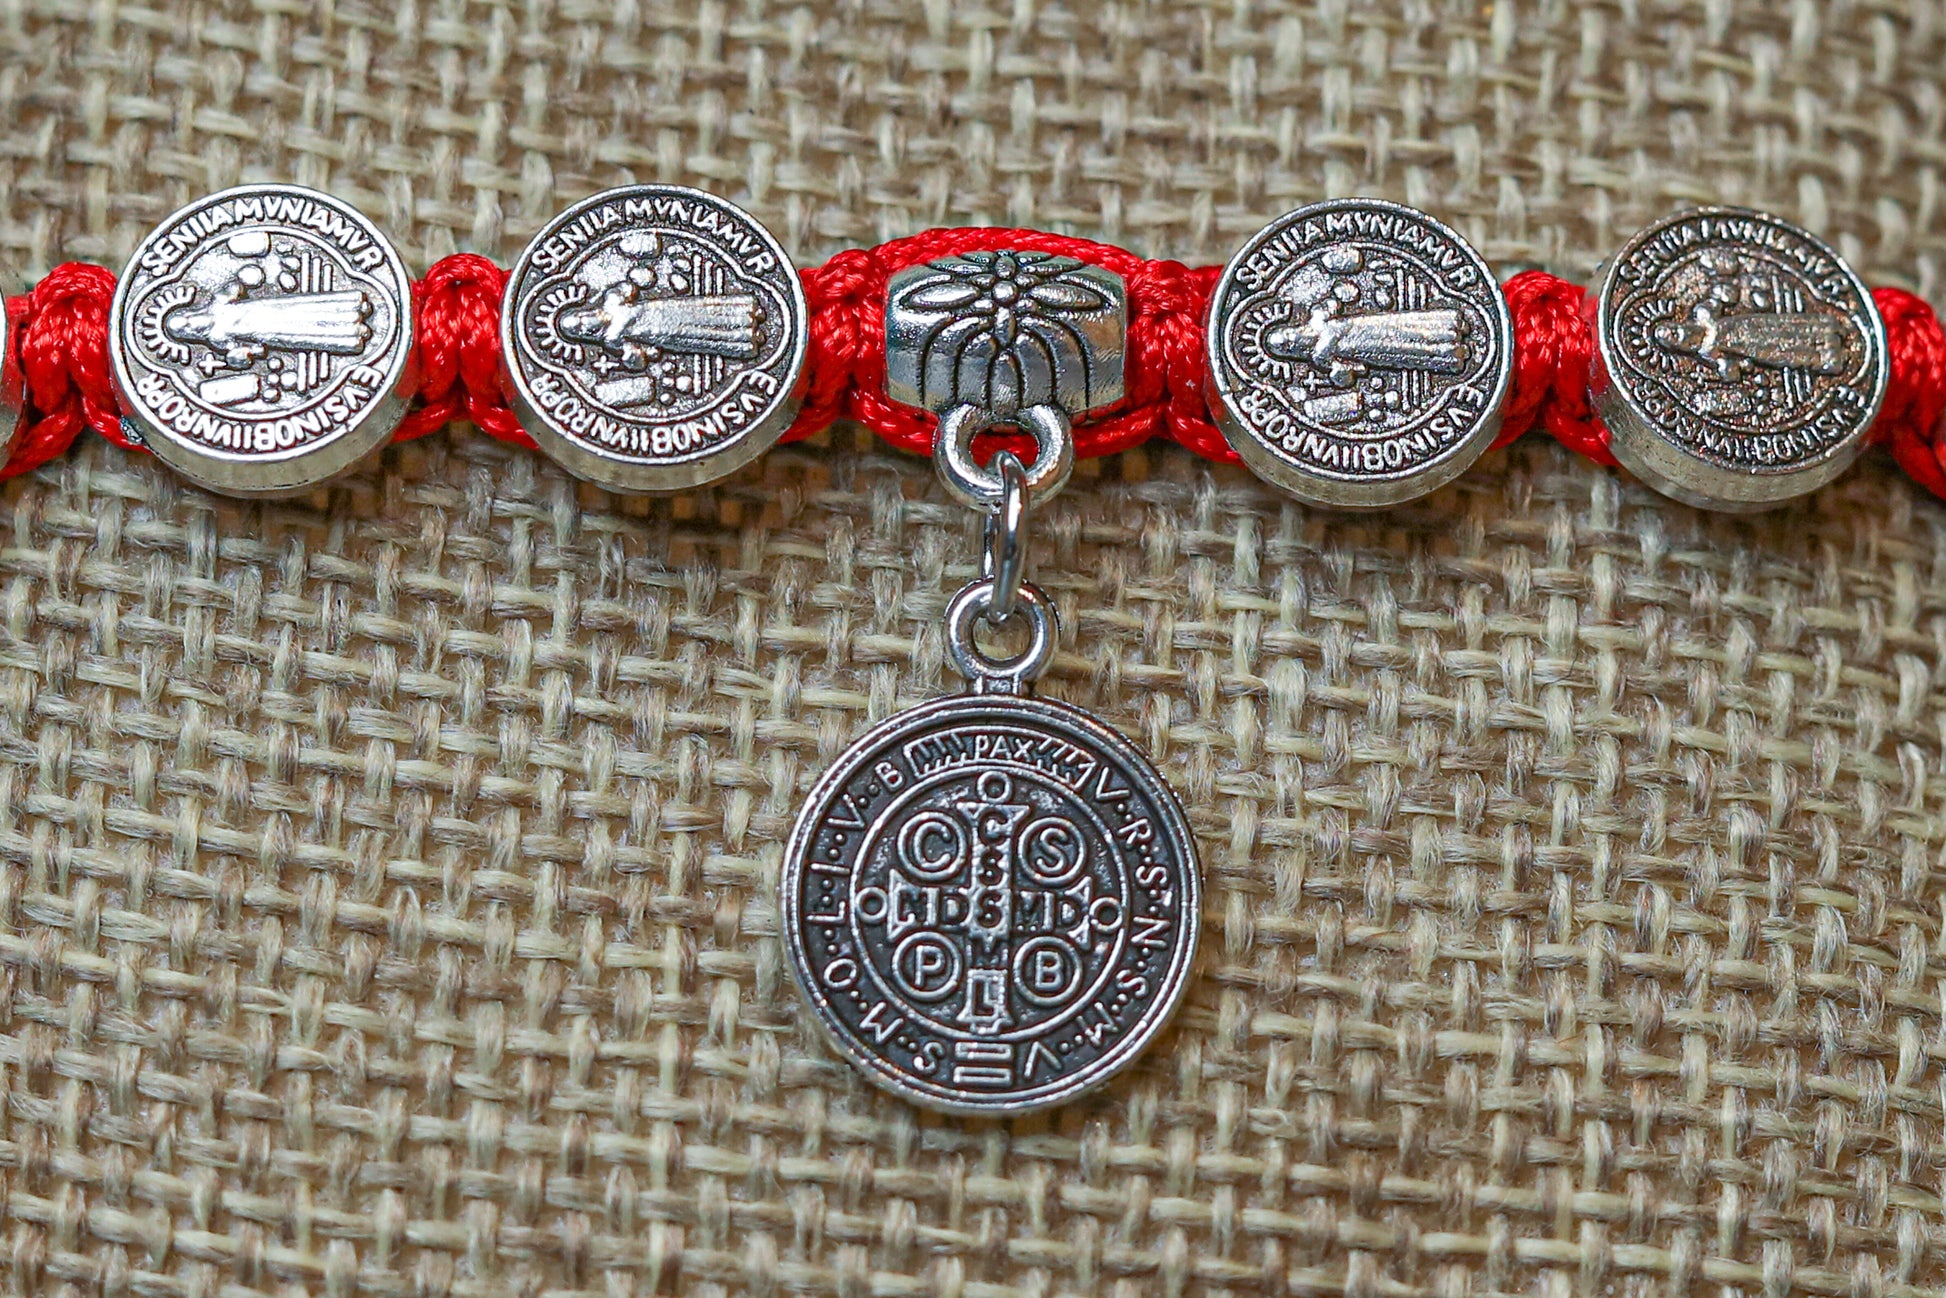 San Juditas charm, a representation of Saint Jude Thaddaeus, the patron saint of desperate cases and lost causes. The charm is believed to provide strength, comfort, and guidance to those who wear it.